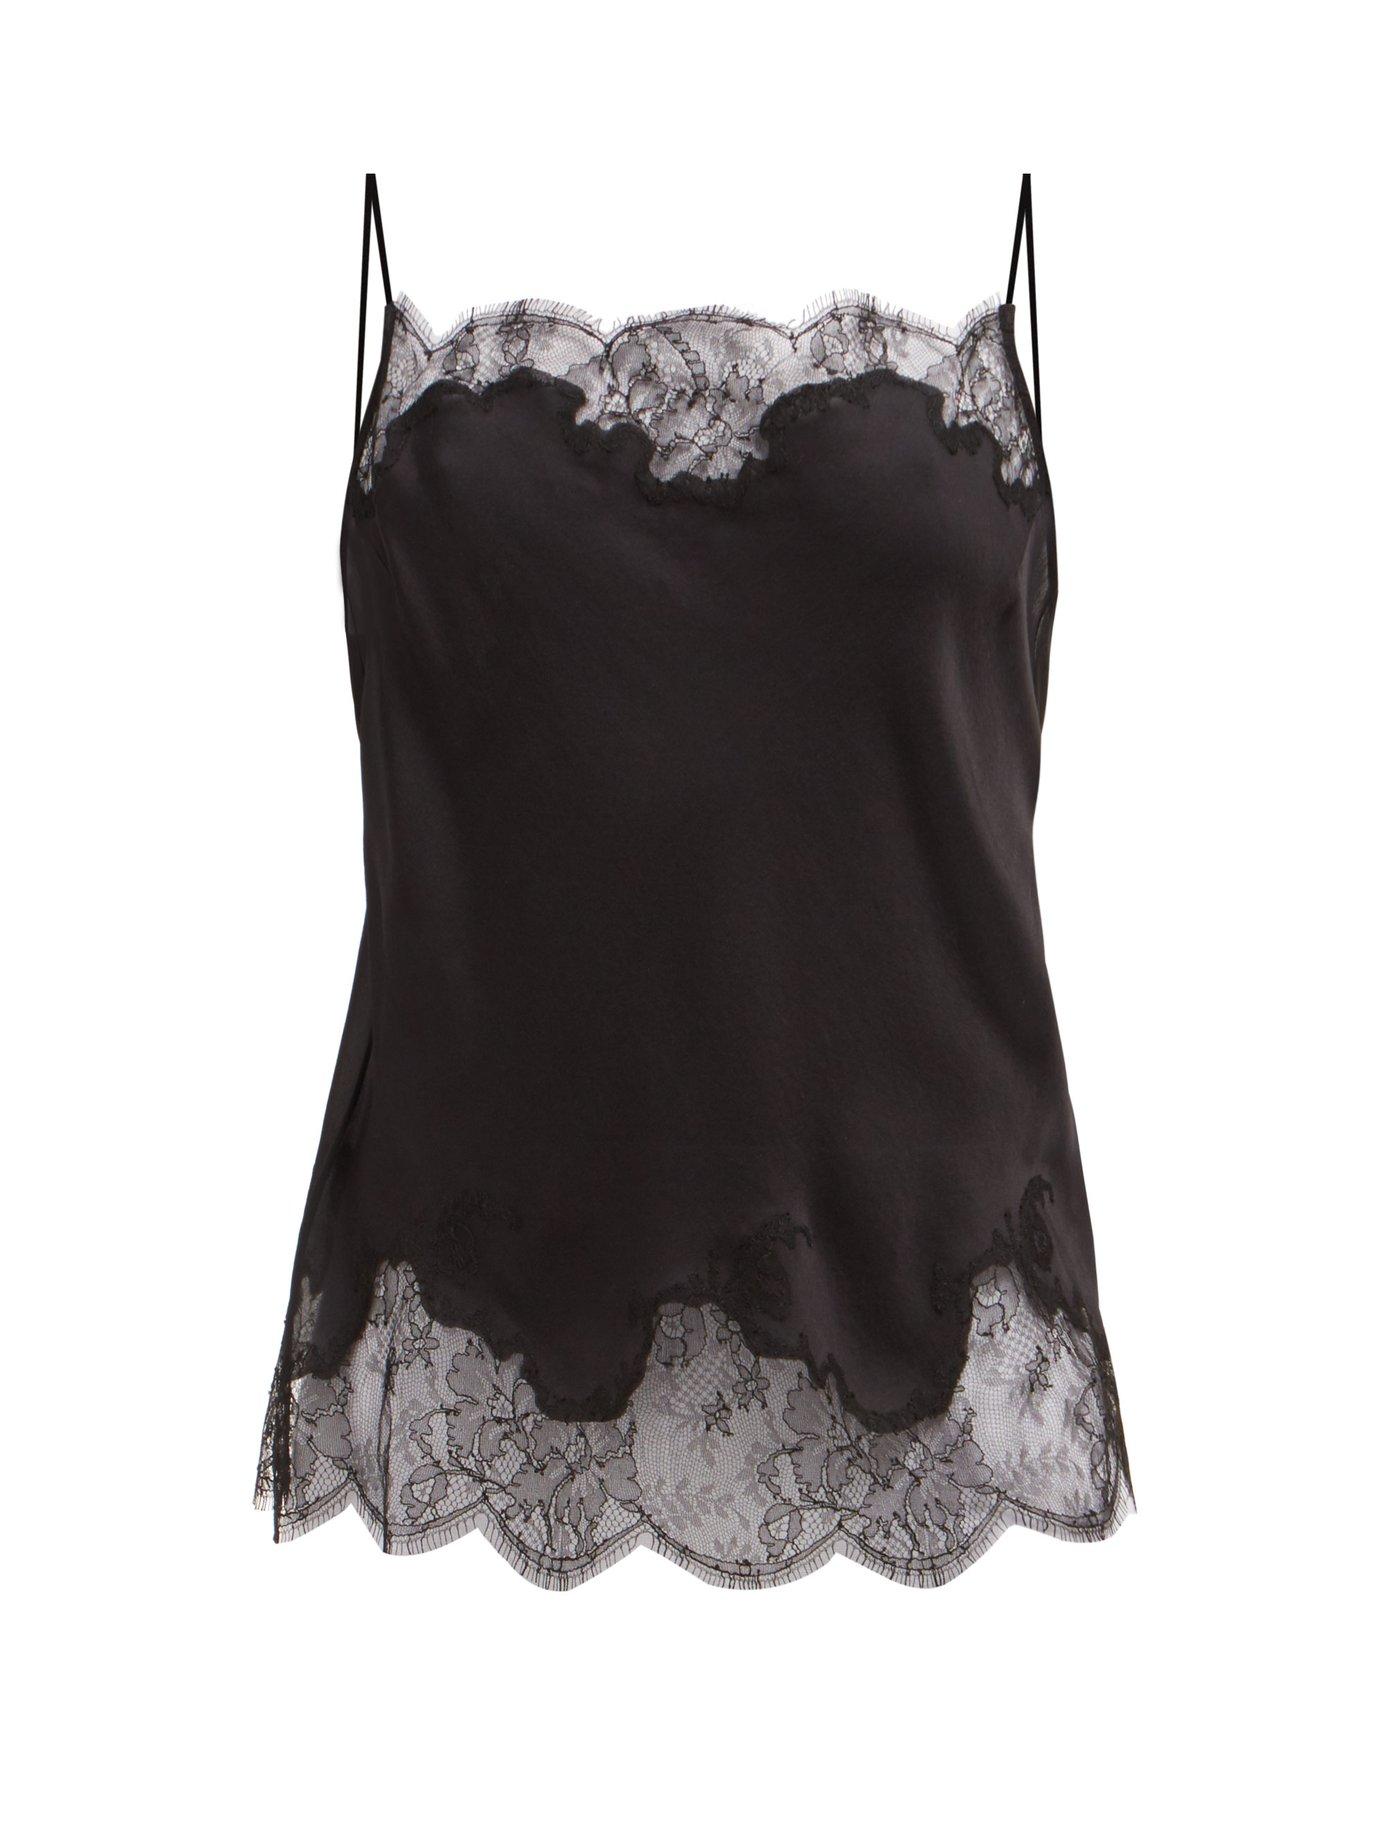 Carine Gilson Lace Trimmed Silk Satin Camisole in Black - Lyst